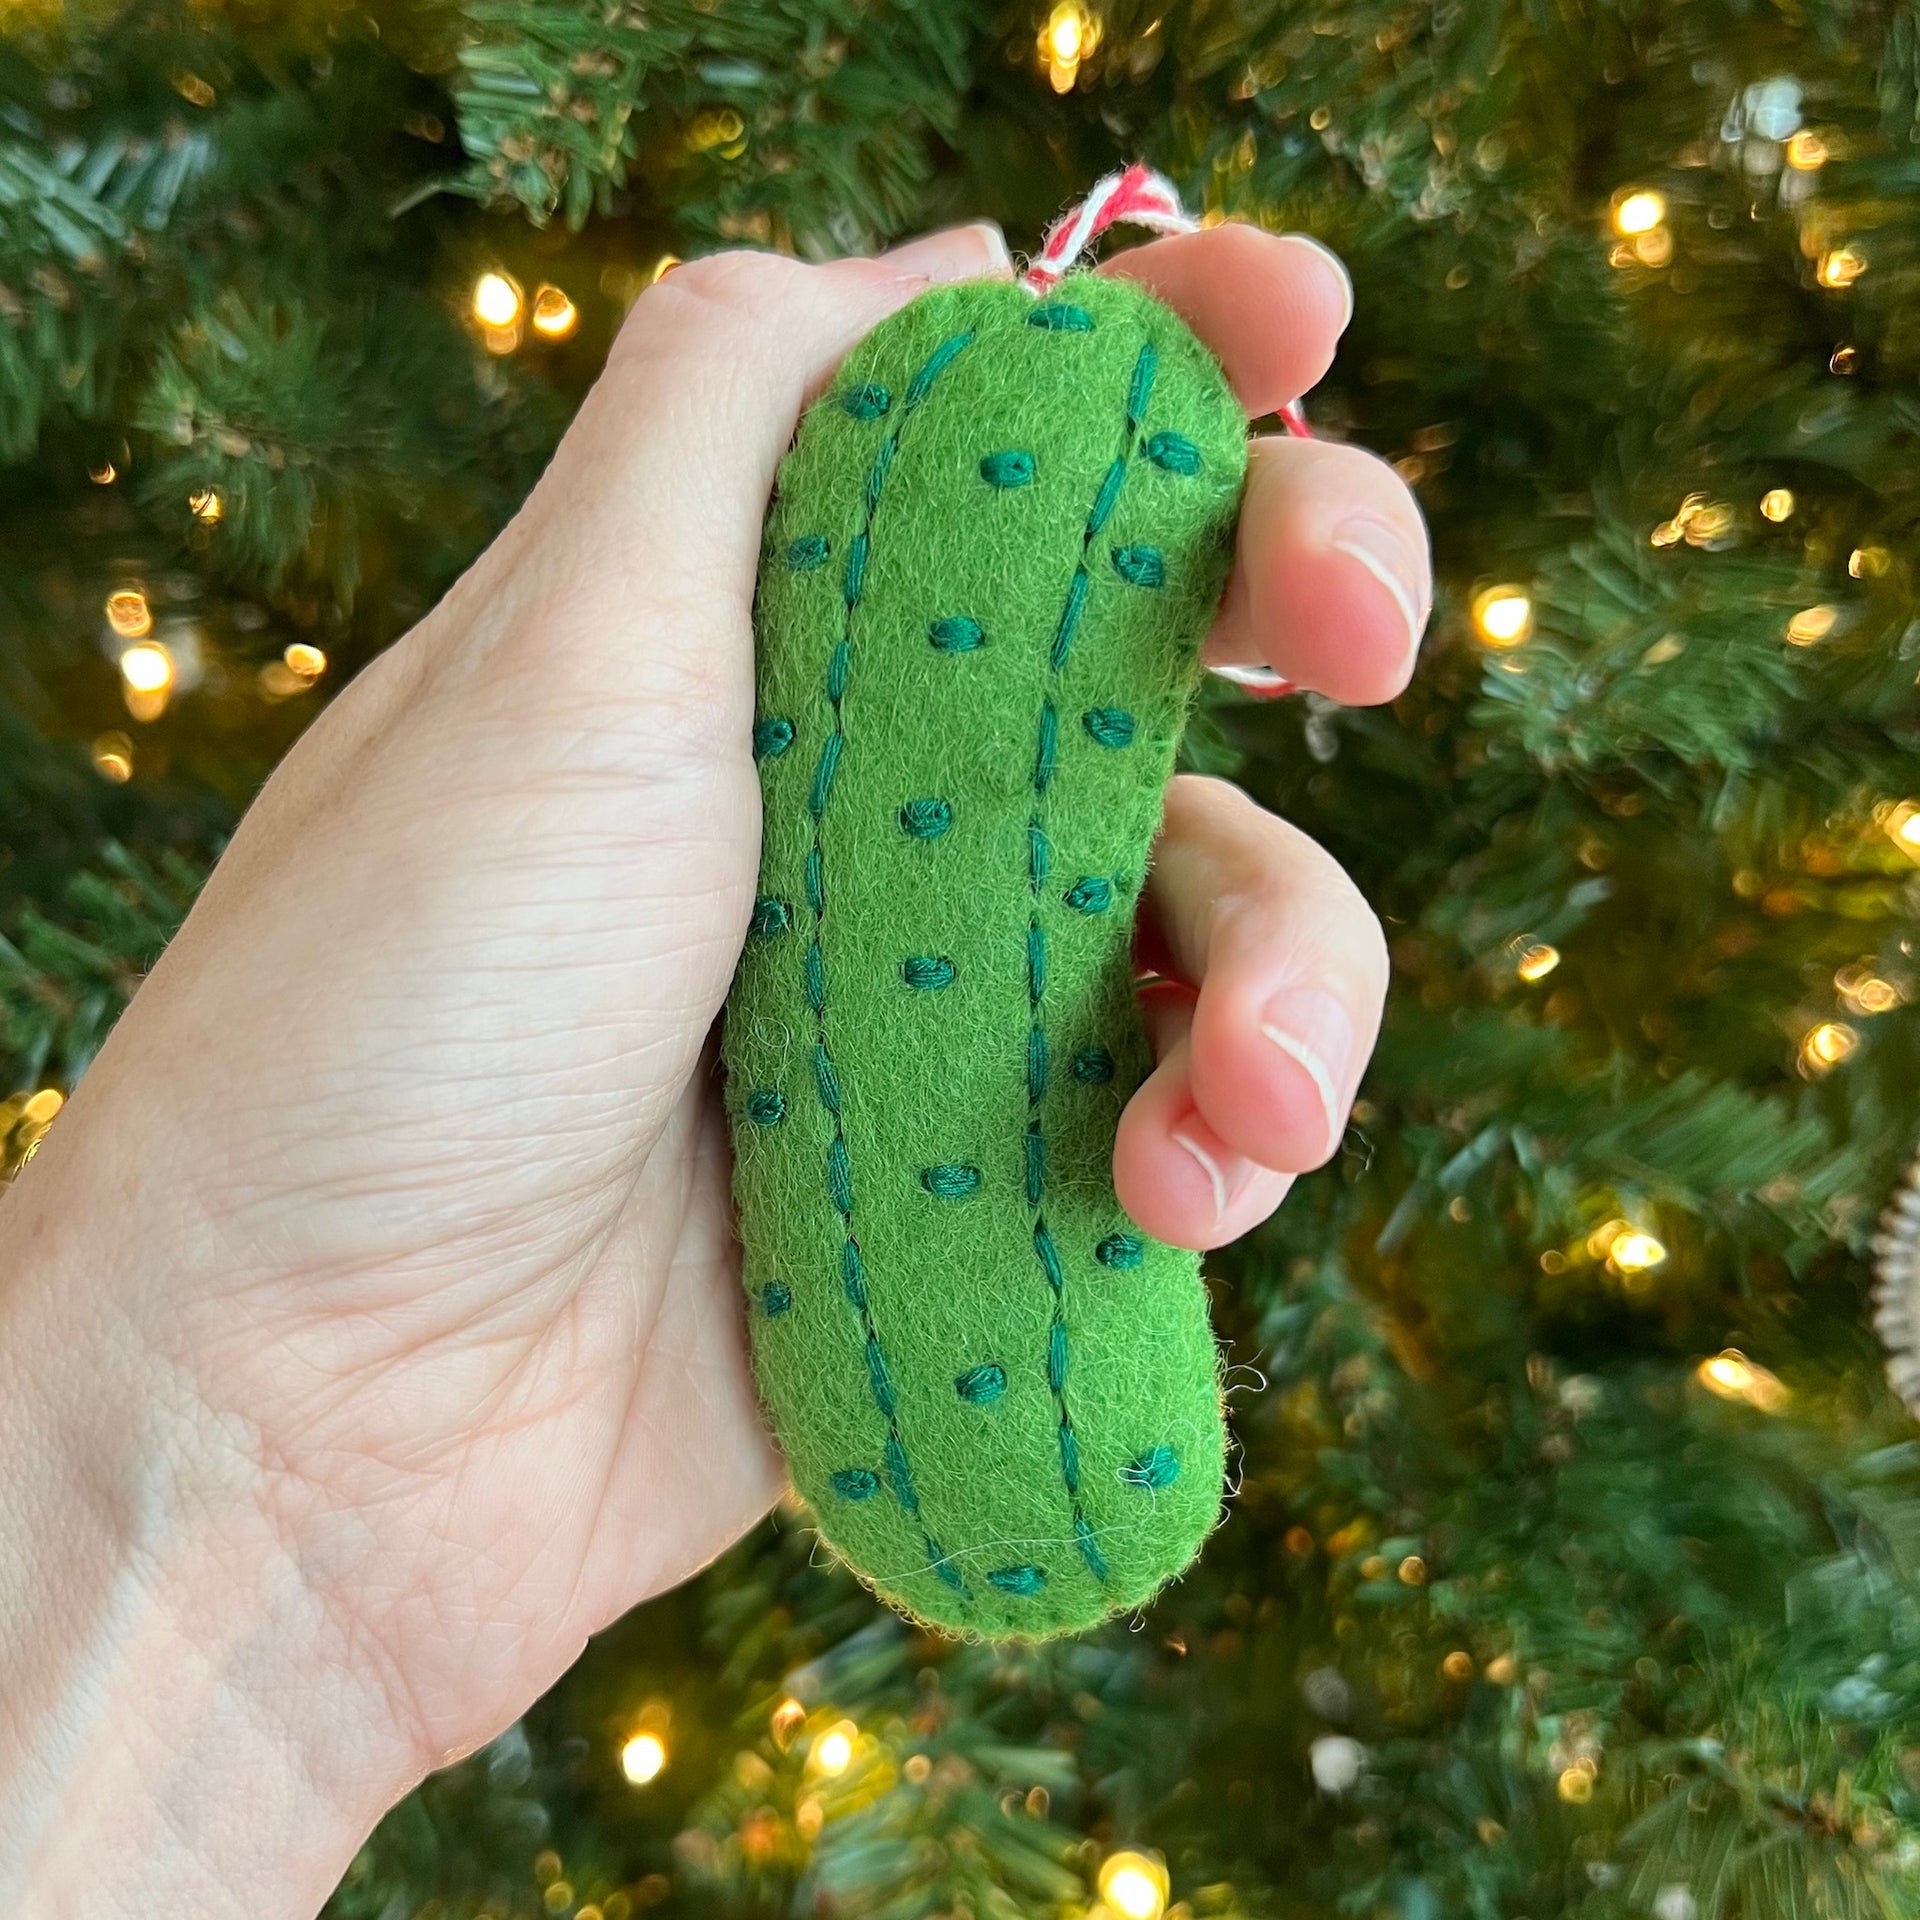 Holding a felt pickle Ornaments 4 Orphans Christmas ornament in front of the tree